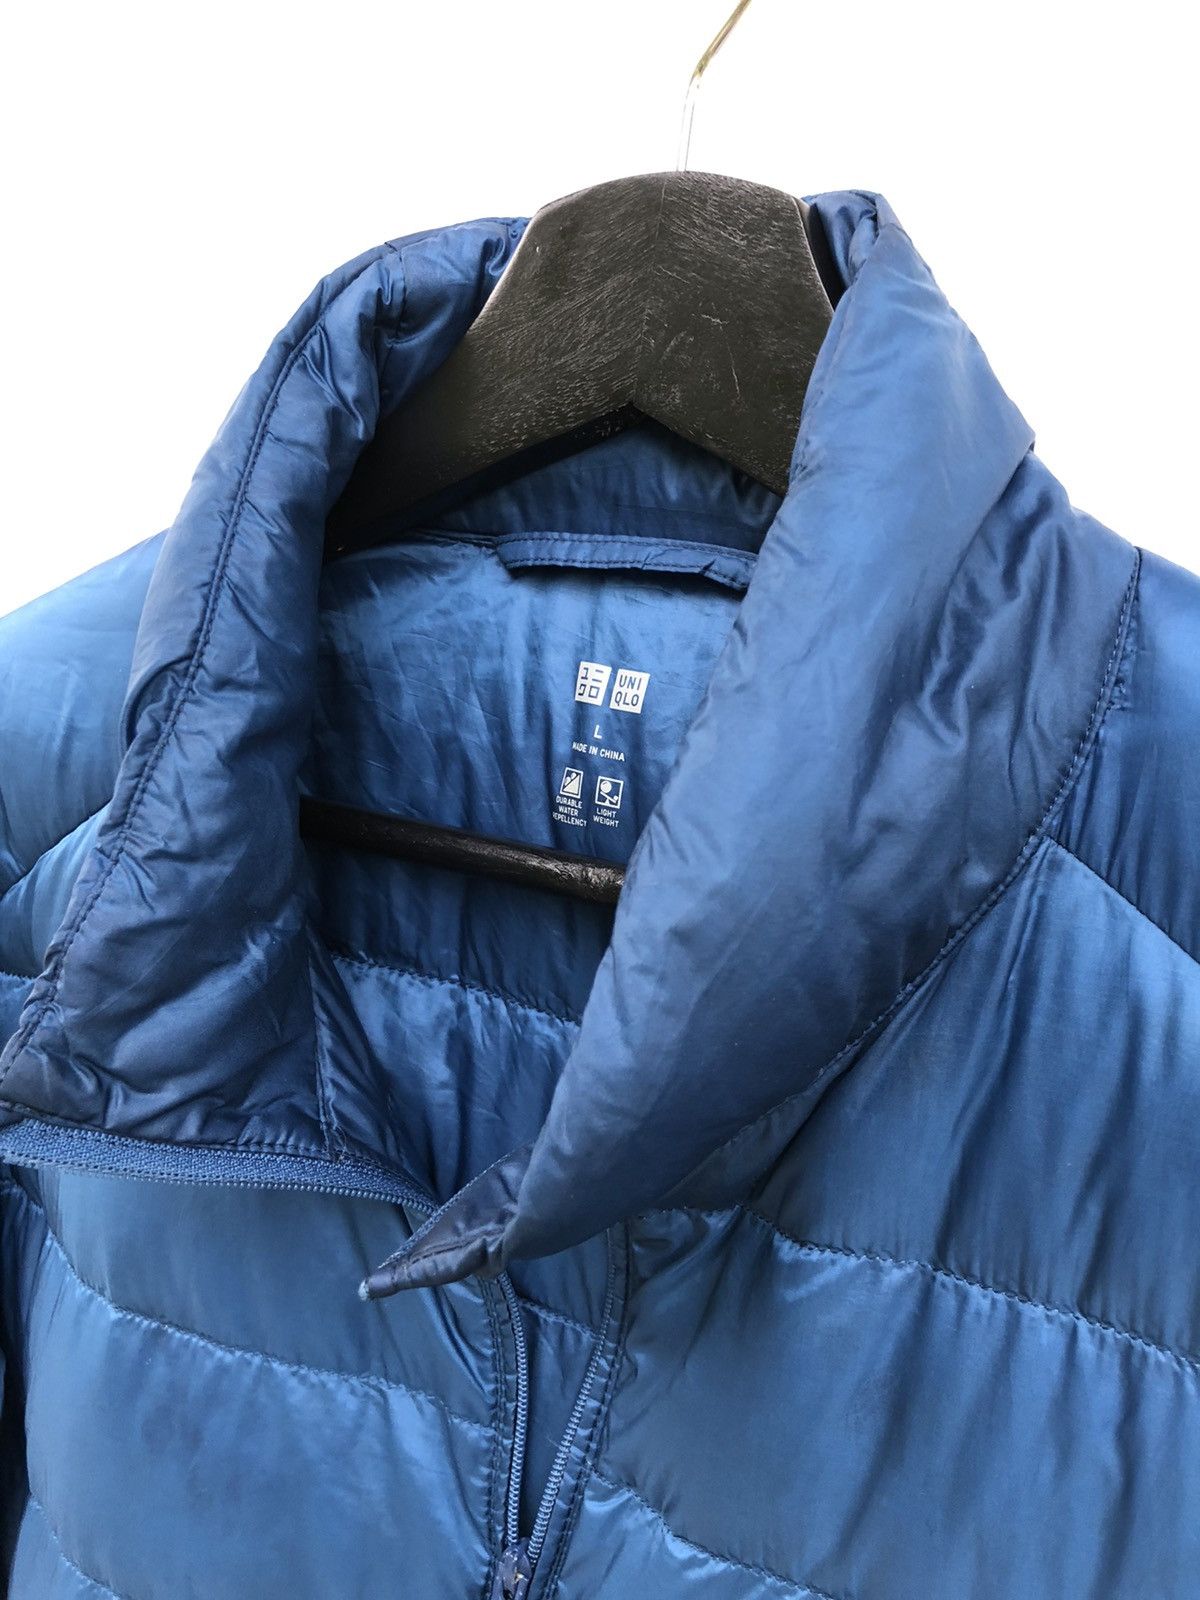 Uniqlo Puffer Quilted Jacket Size US S / EU 44-46 / 1 - 3 Thumbnail